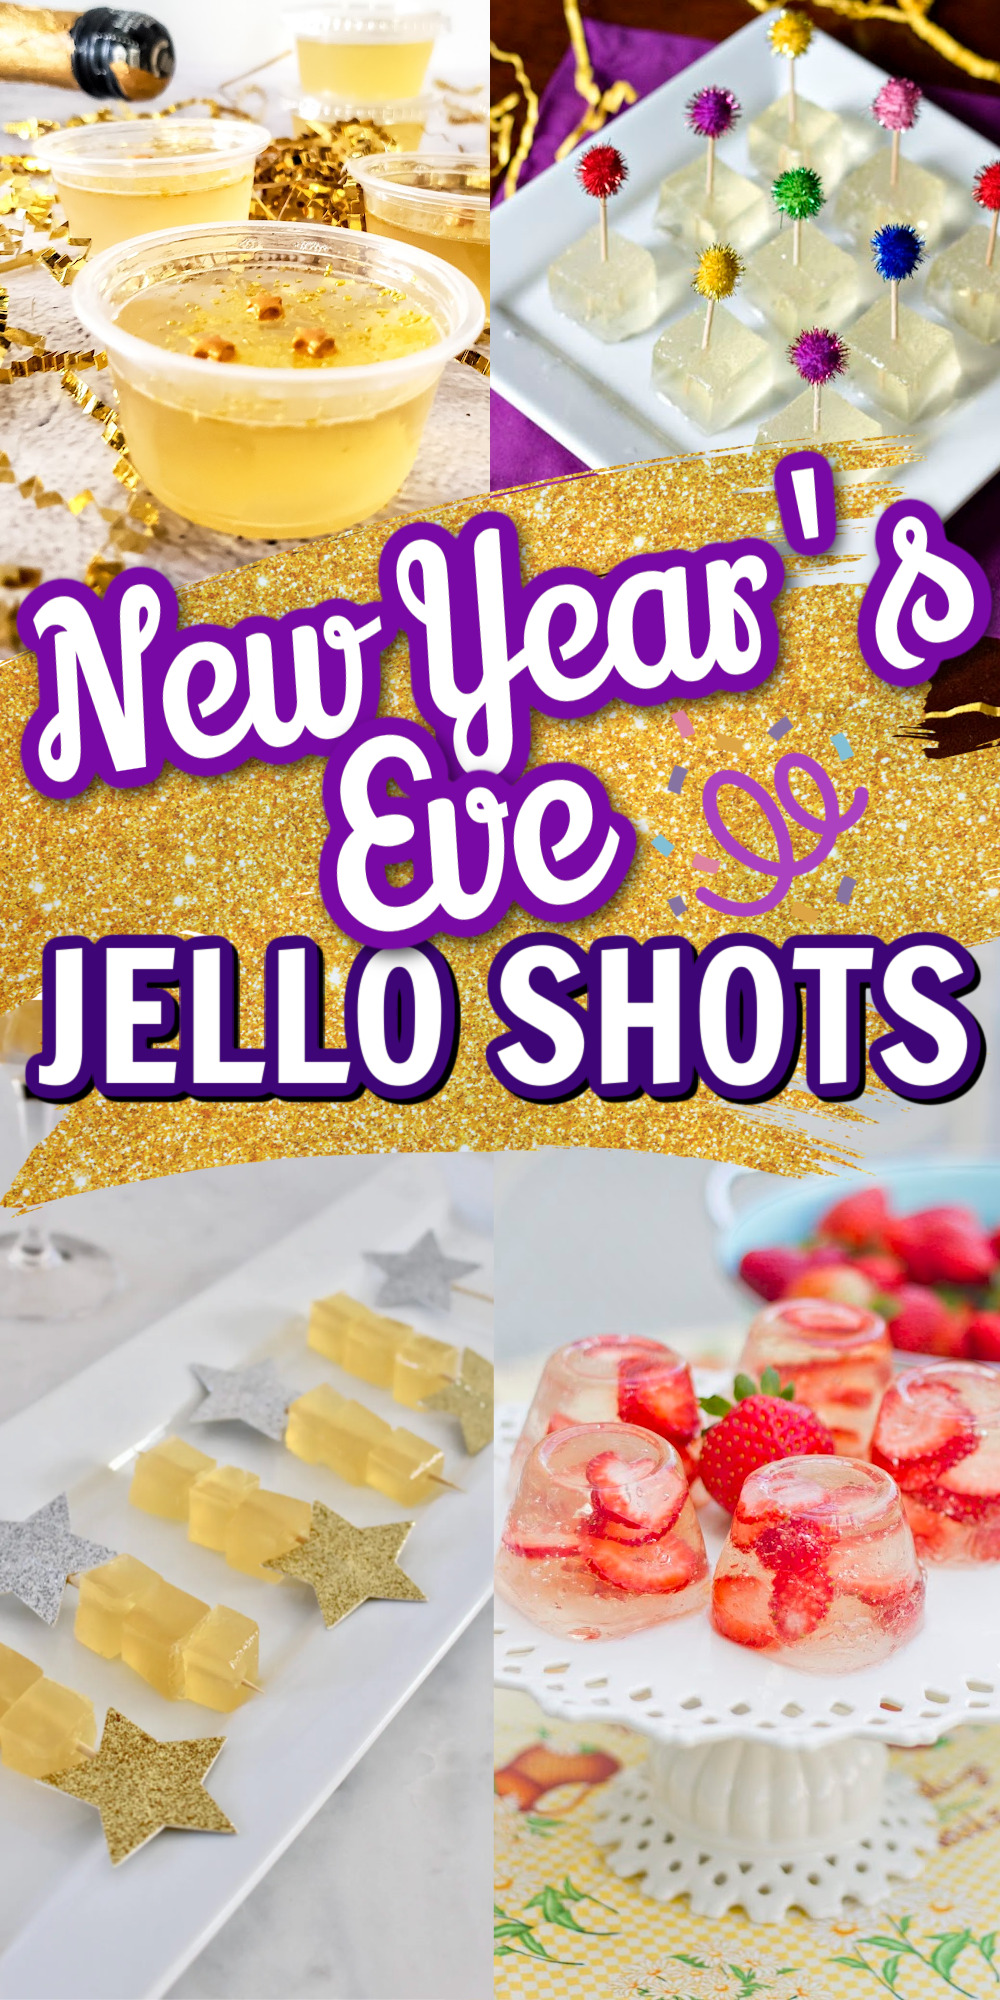 A collage of New Year's Eve jello shots. Including champagne jello shots and other fruity flavors.